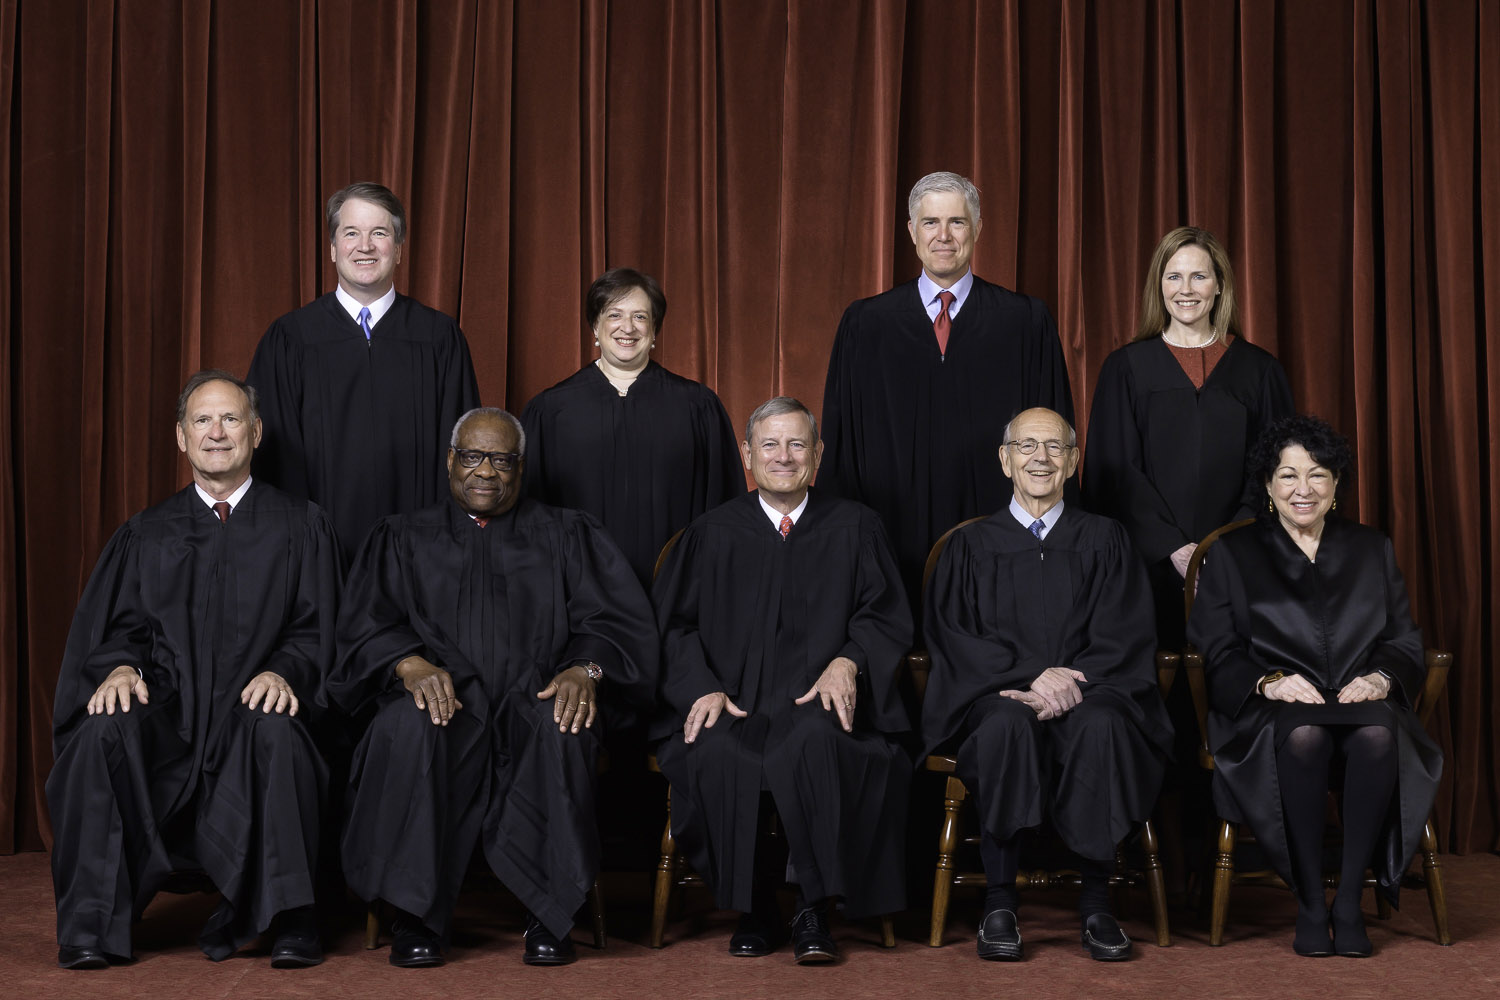 From guns to religion: Supreme Court is juggling major controversies besides abortion